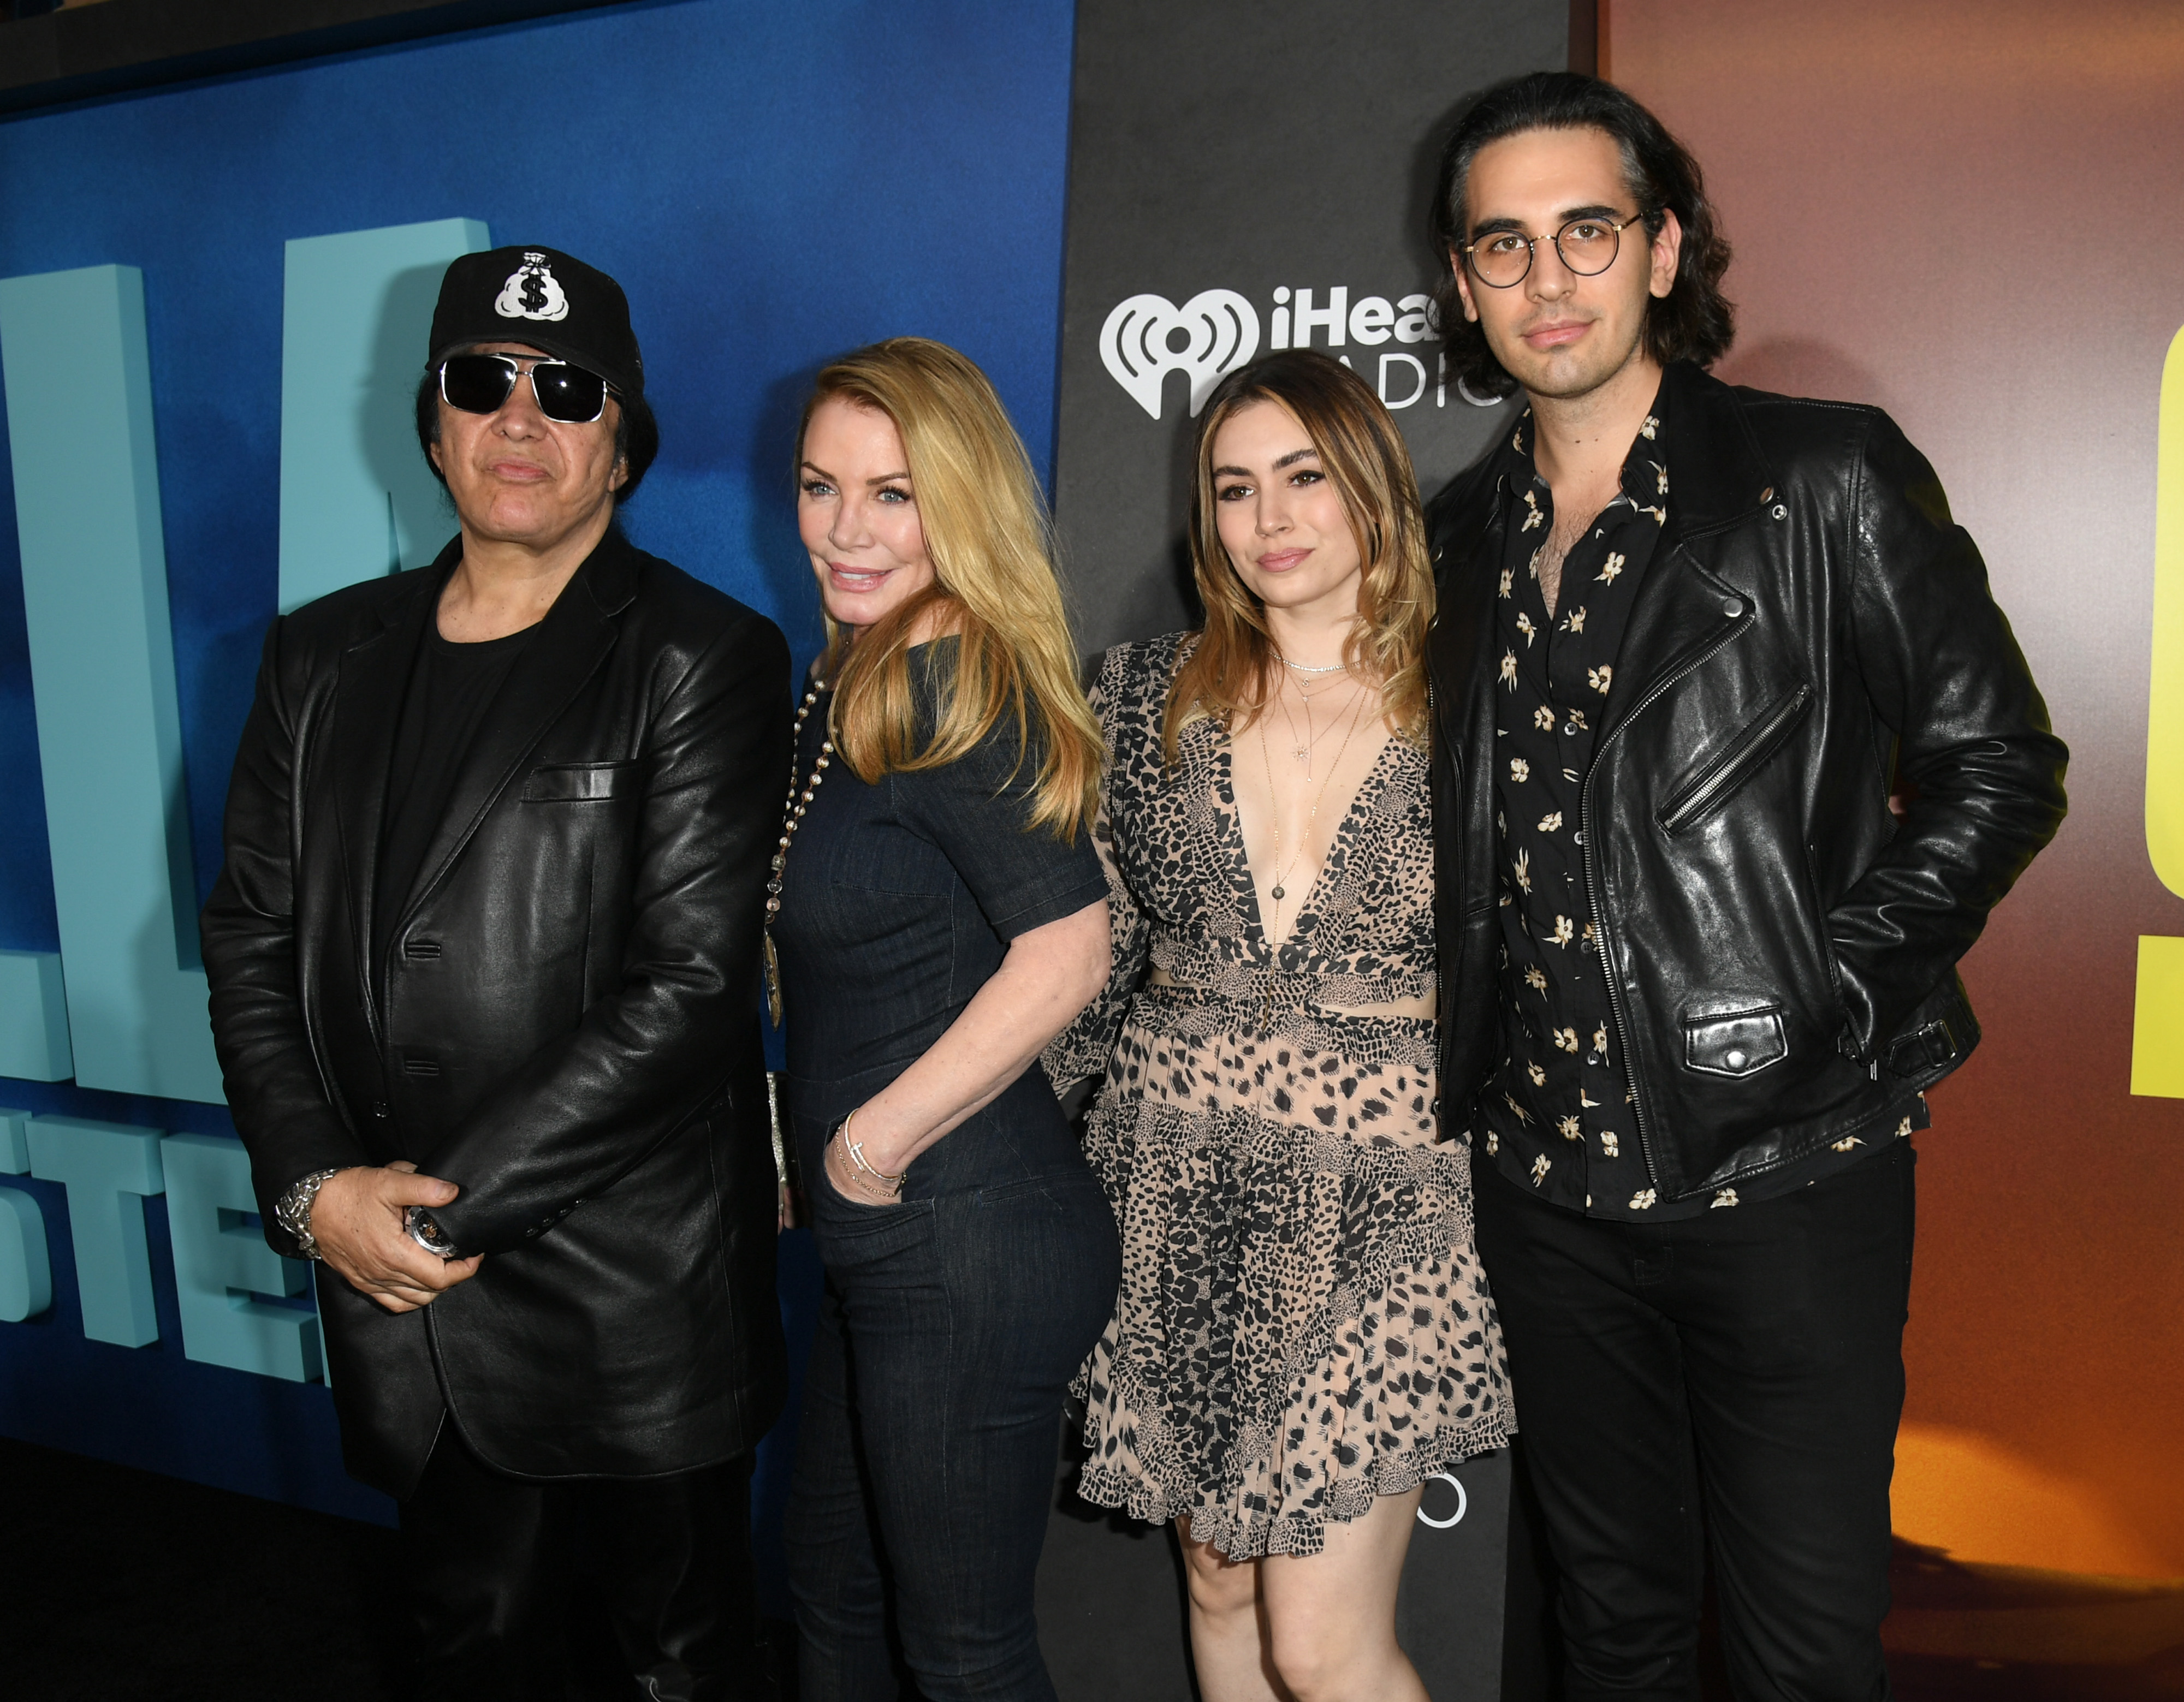 Gene Simmons, Shannon Tweed, Sophie Simmons, and Nick Simmons at the premiere of "Godzilla: King of the Monsters" on May 18, 2019, in Hollywood, California. | Source: Getty Images